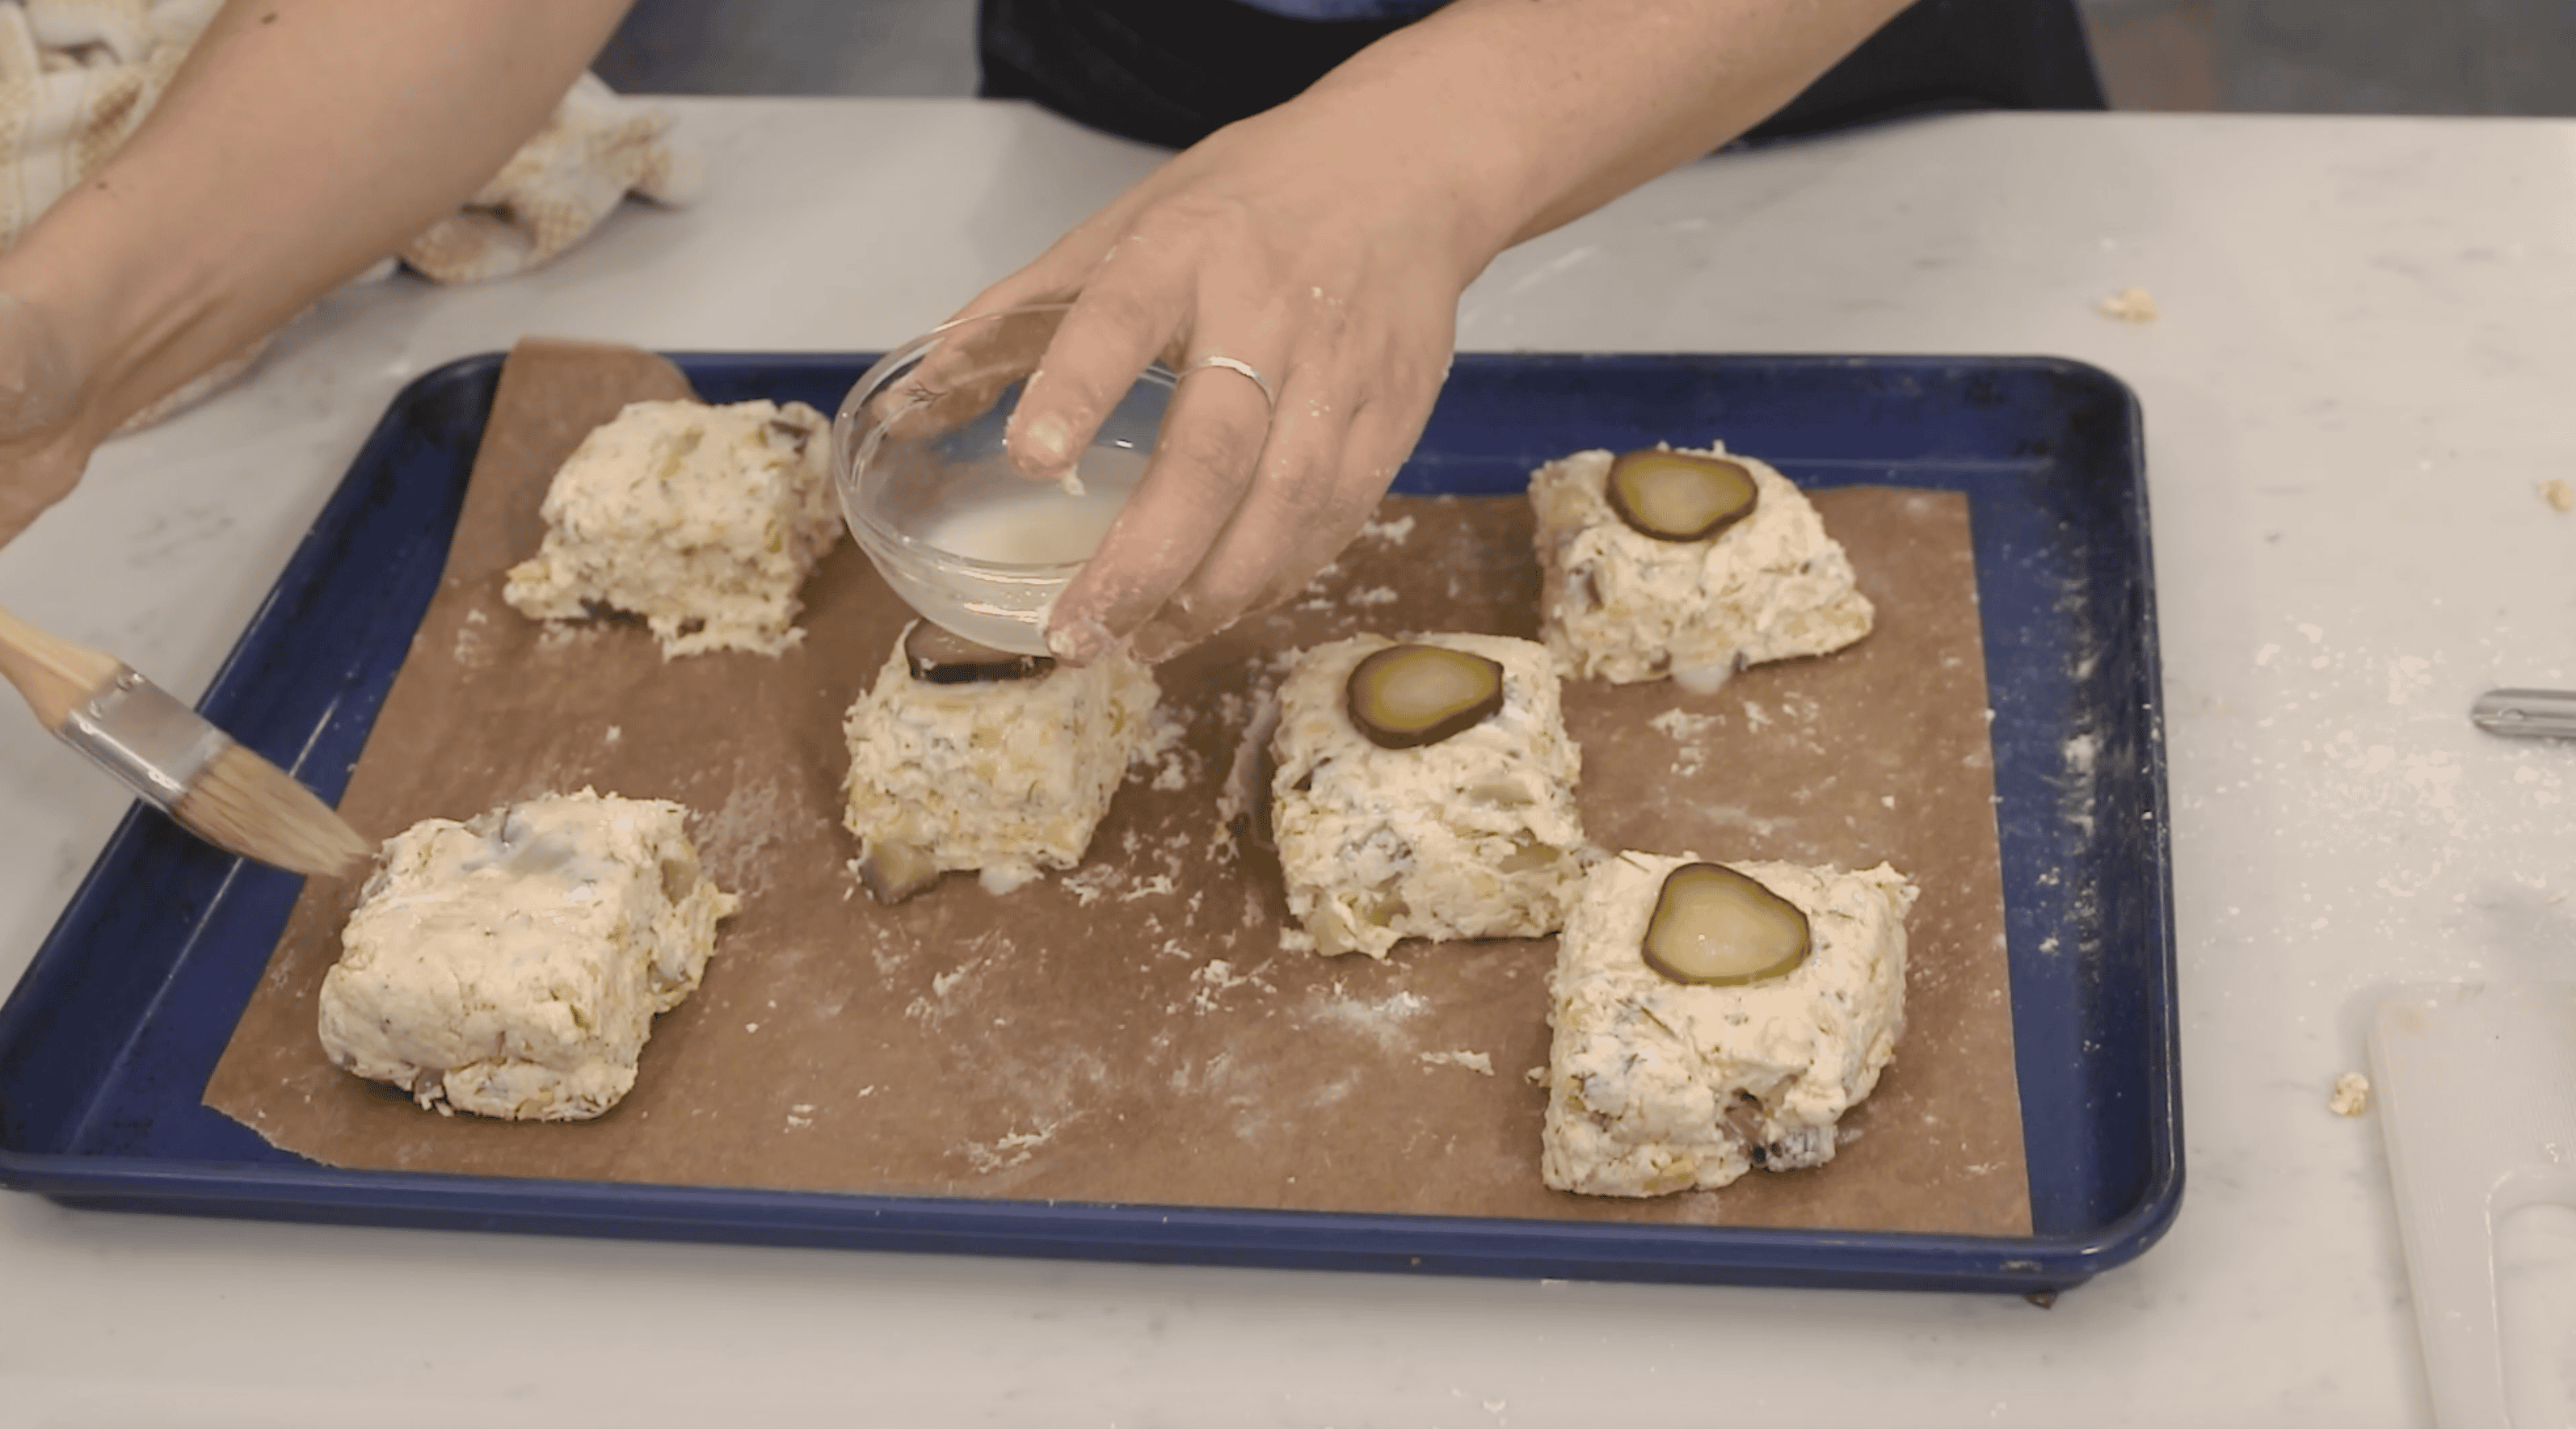 brushing biscuits with vegan egg wash and topping with a pickle slice